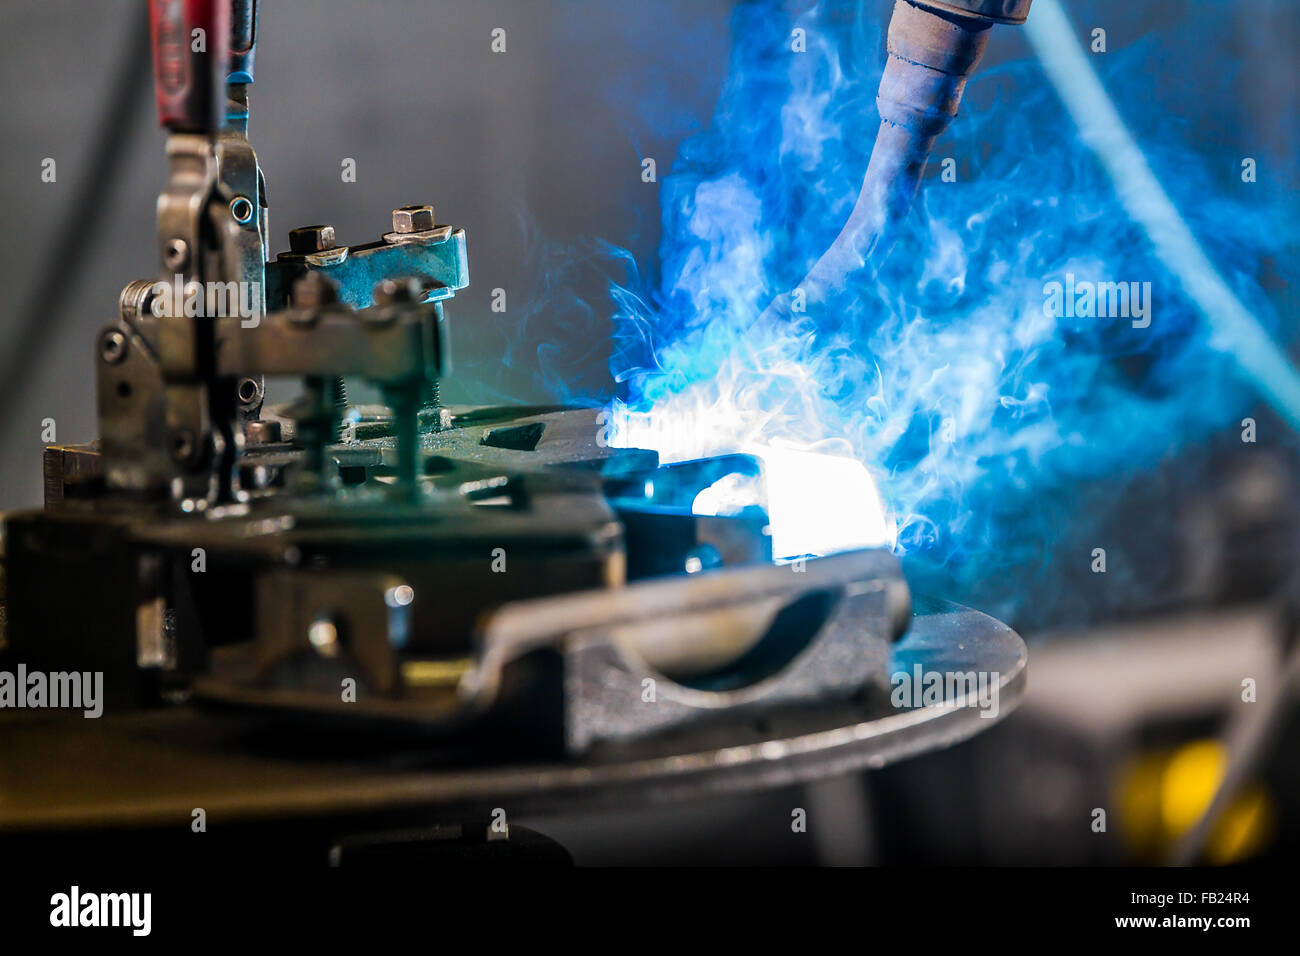 Bright light and smoke from CNC robotic mig welding of half inch steel parts with hold-down clamp and bolts on work table Stock Photo